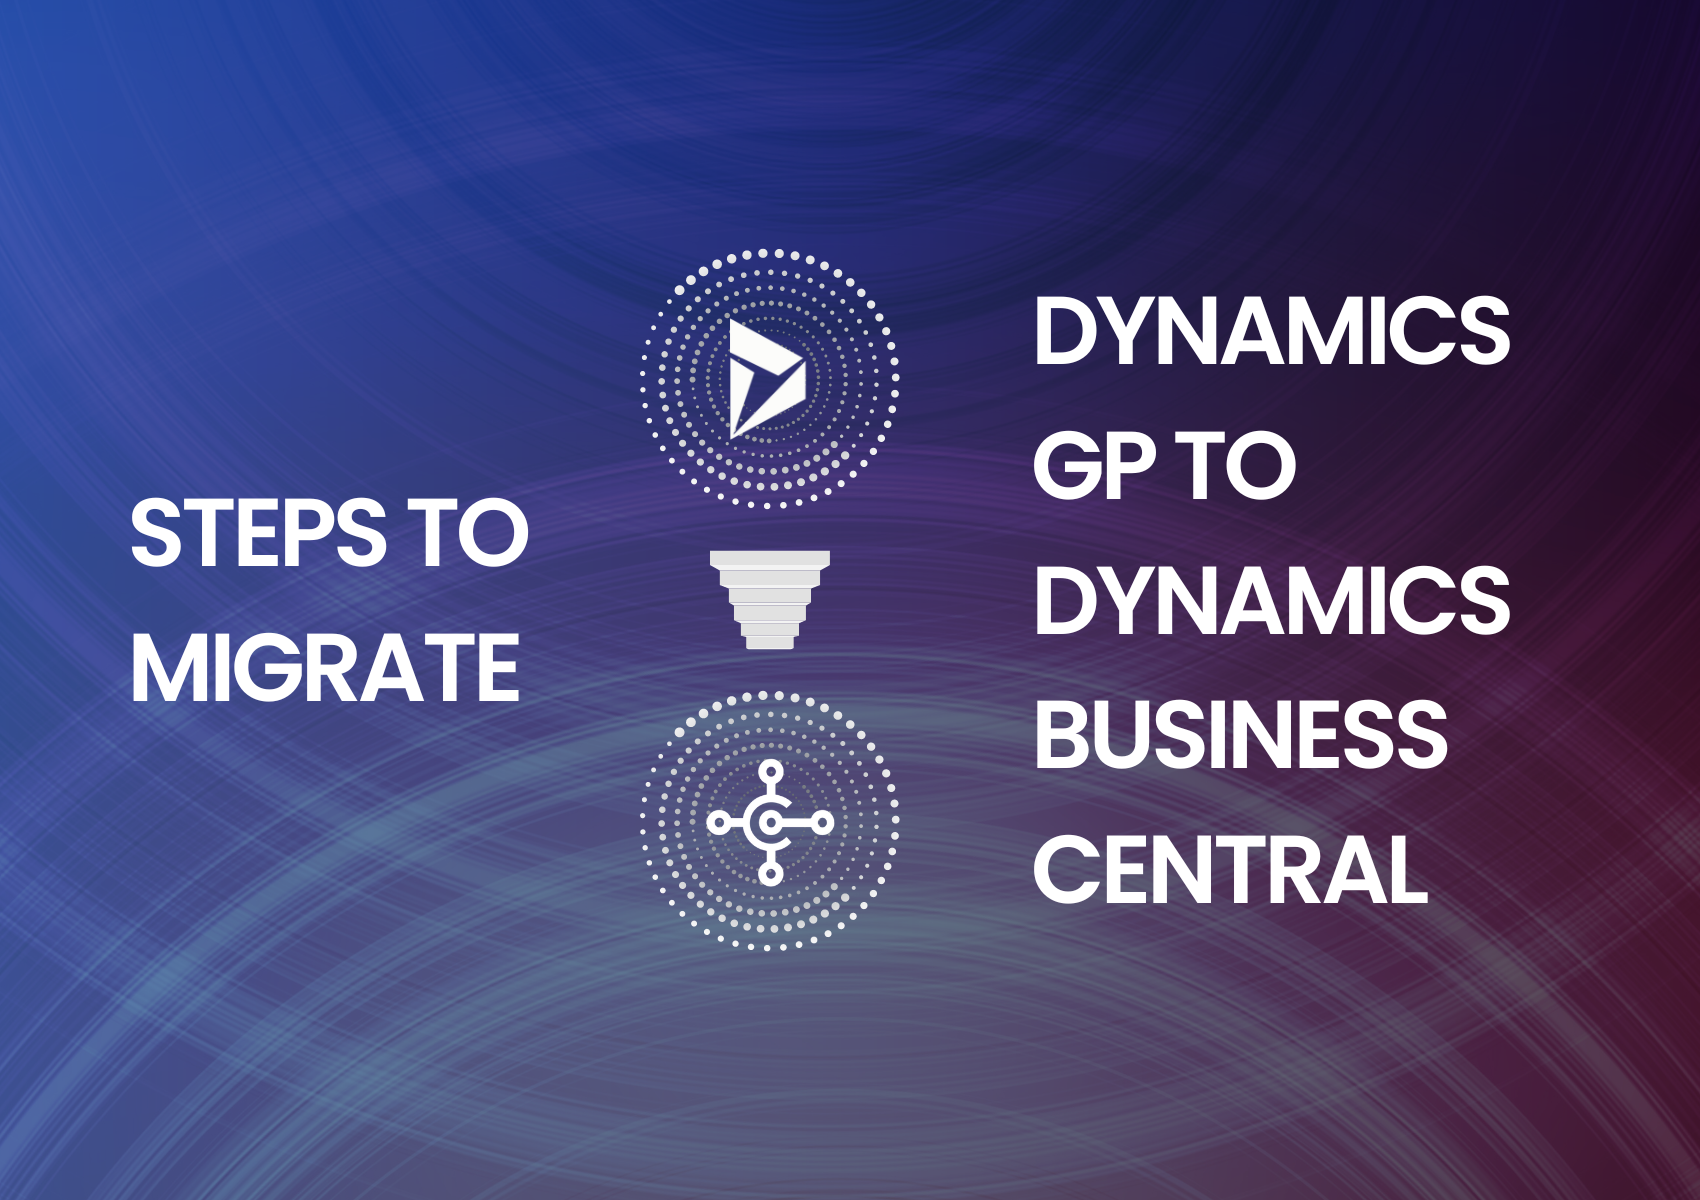 How to migrate from Dynamics GP to Business Central in a few easy steps?